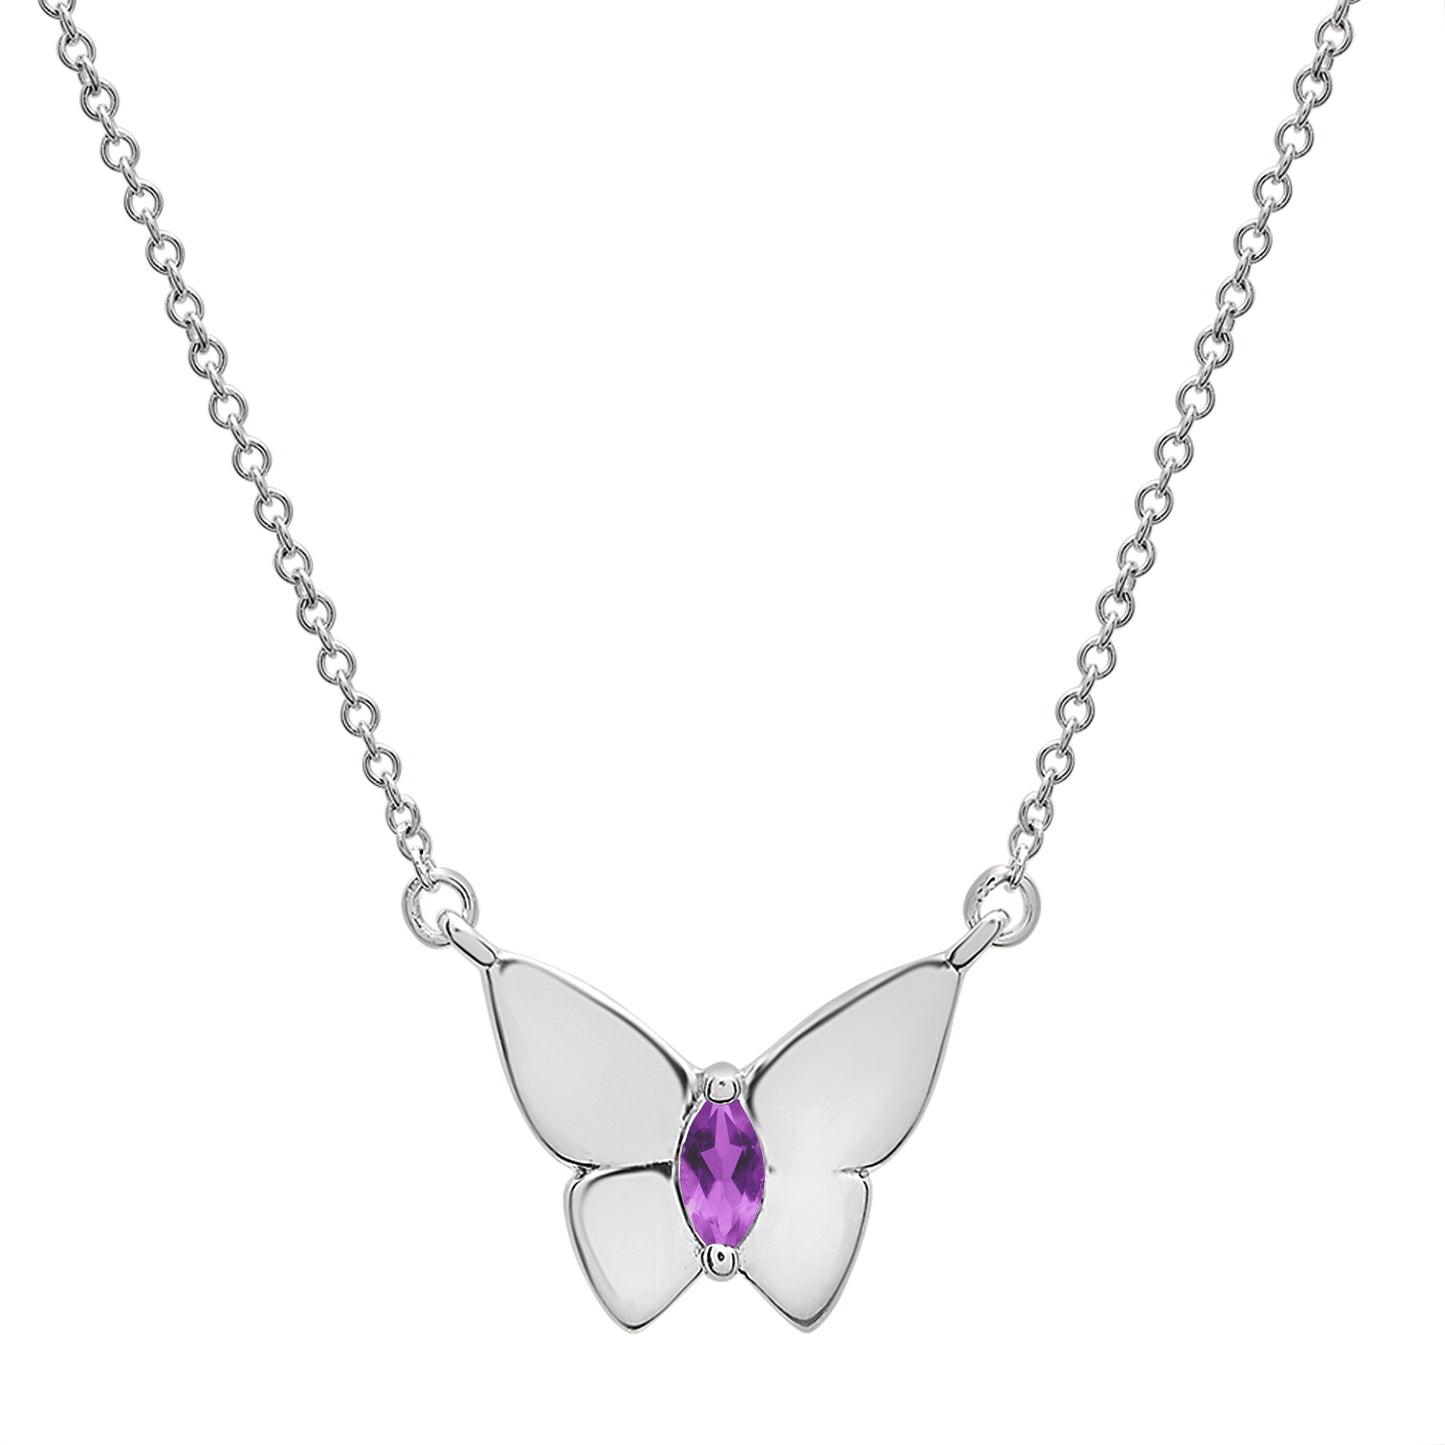 Purlple Stone Butterfly Birthstone Necklace with Silver chain